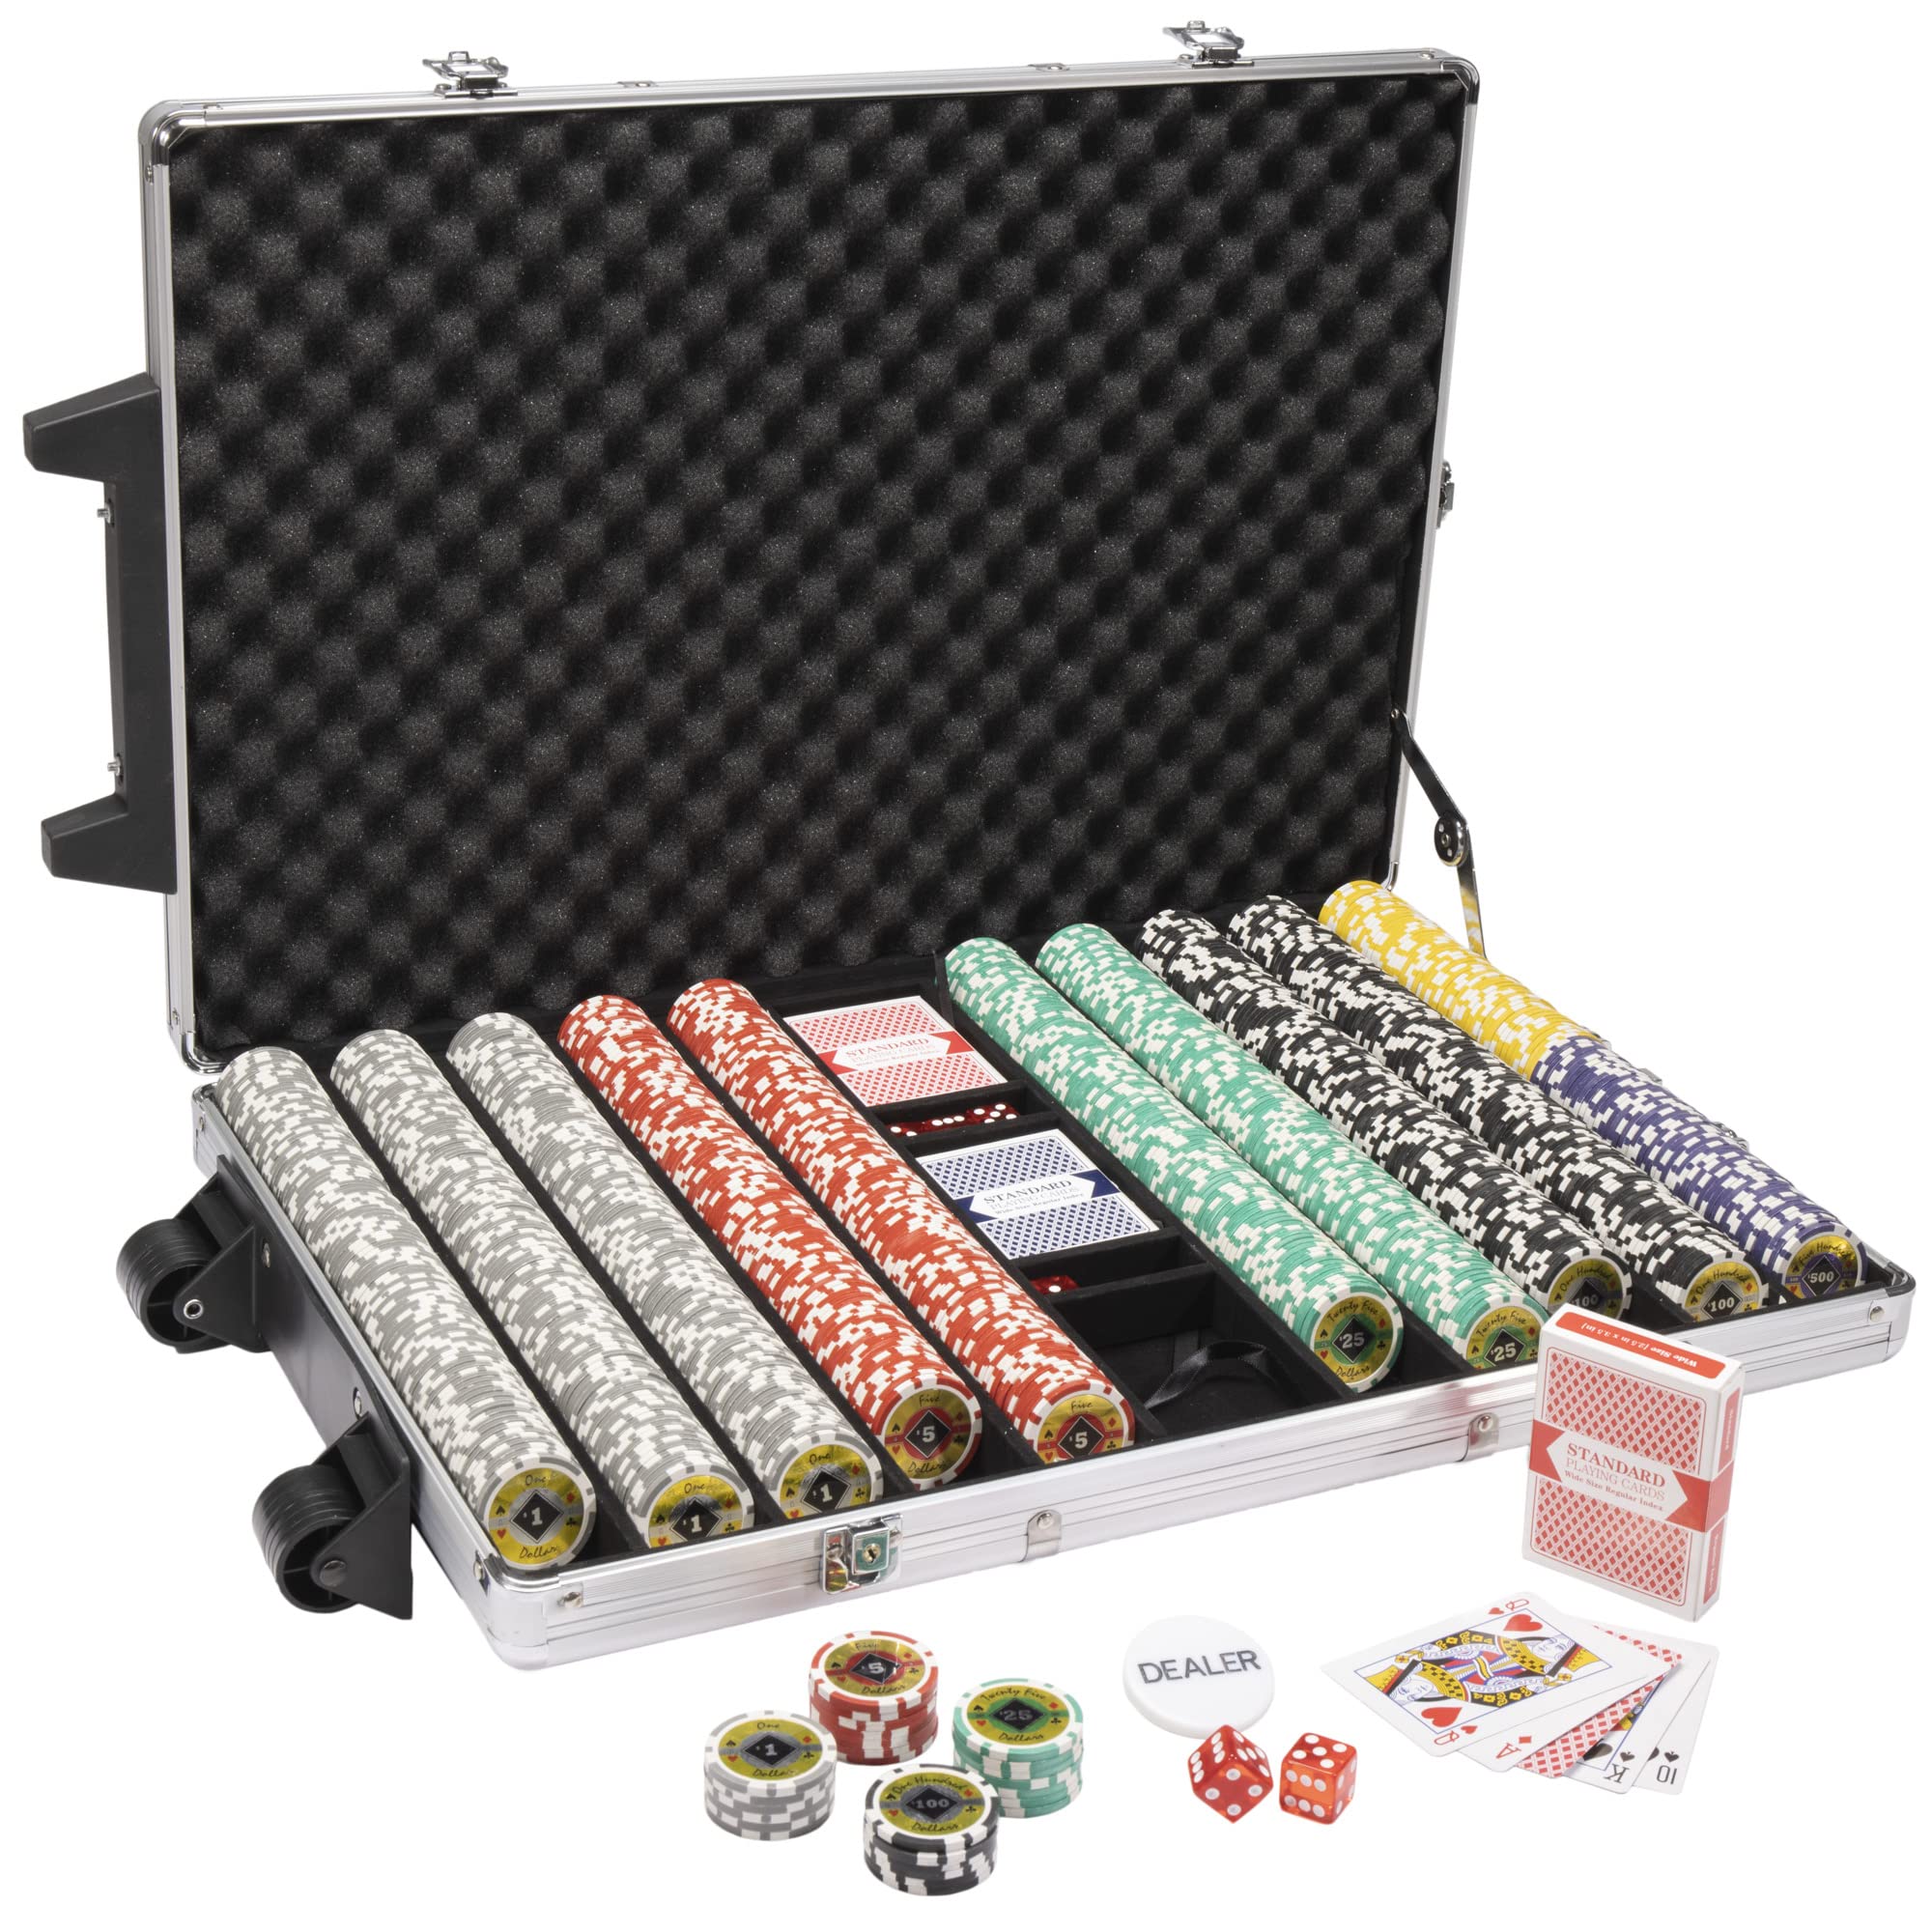 Black Diamond 14-gram Holo Inlay Poker Chip Set in Rolling Aluminum Case (1000 Count) - Clay Composite